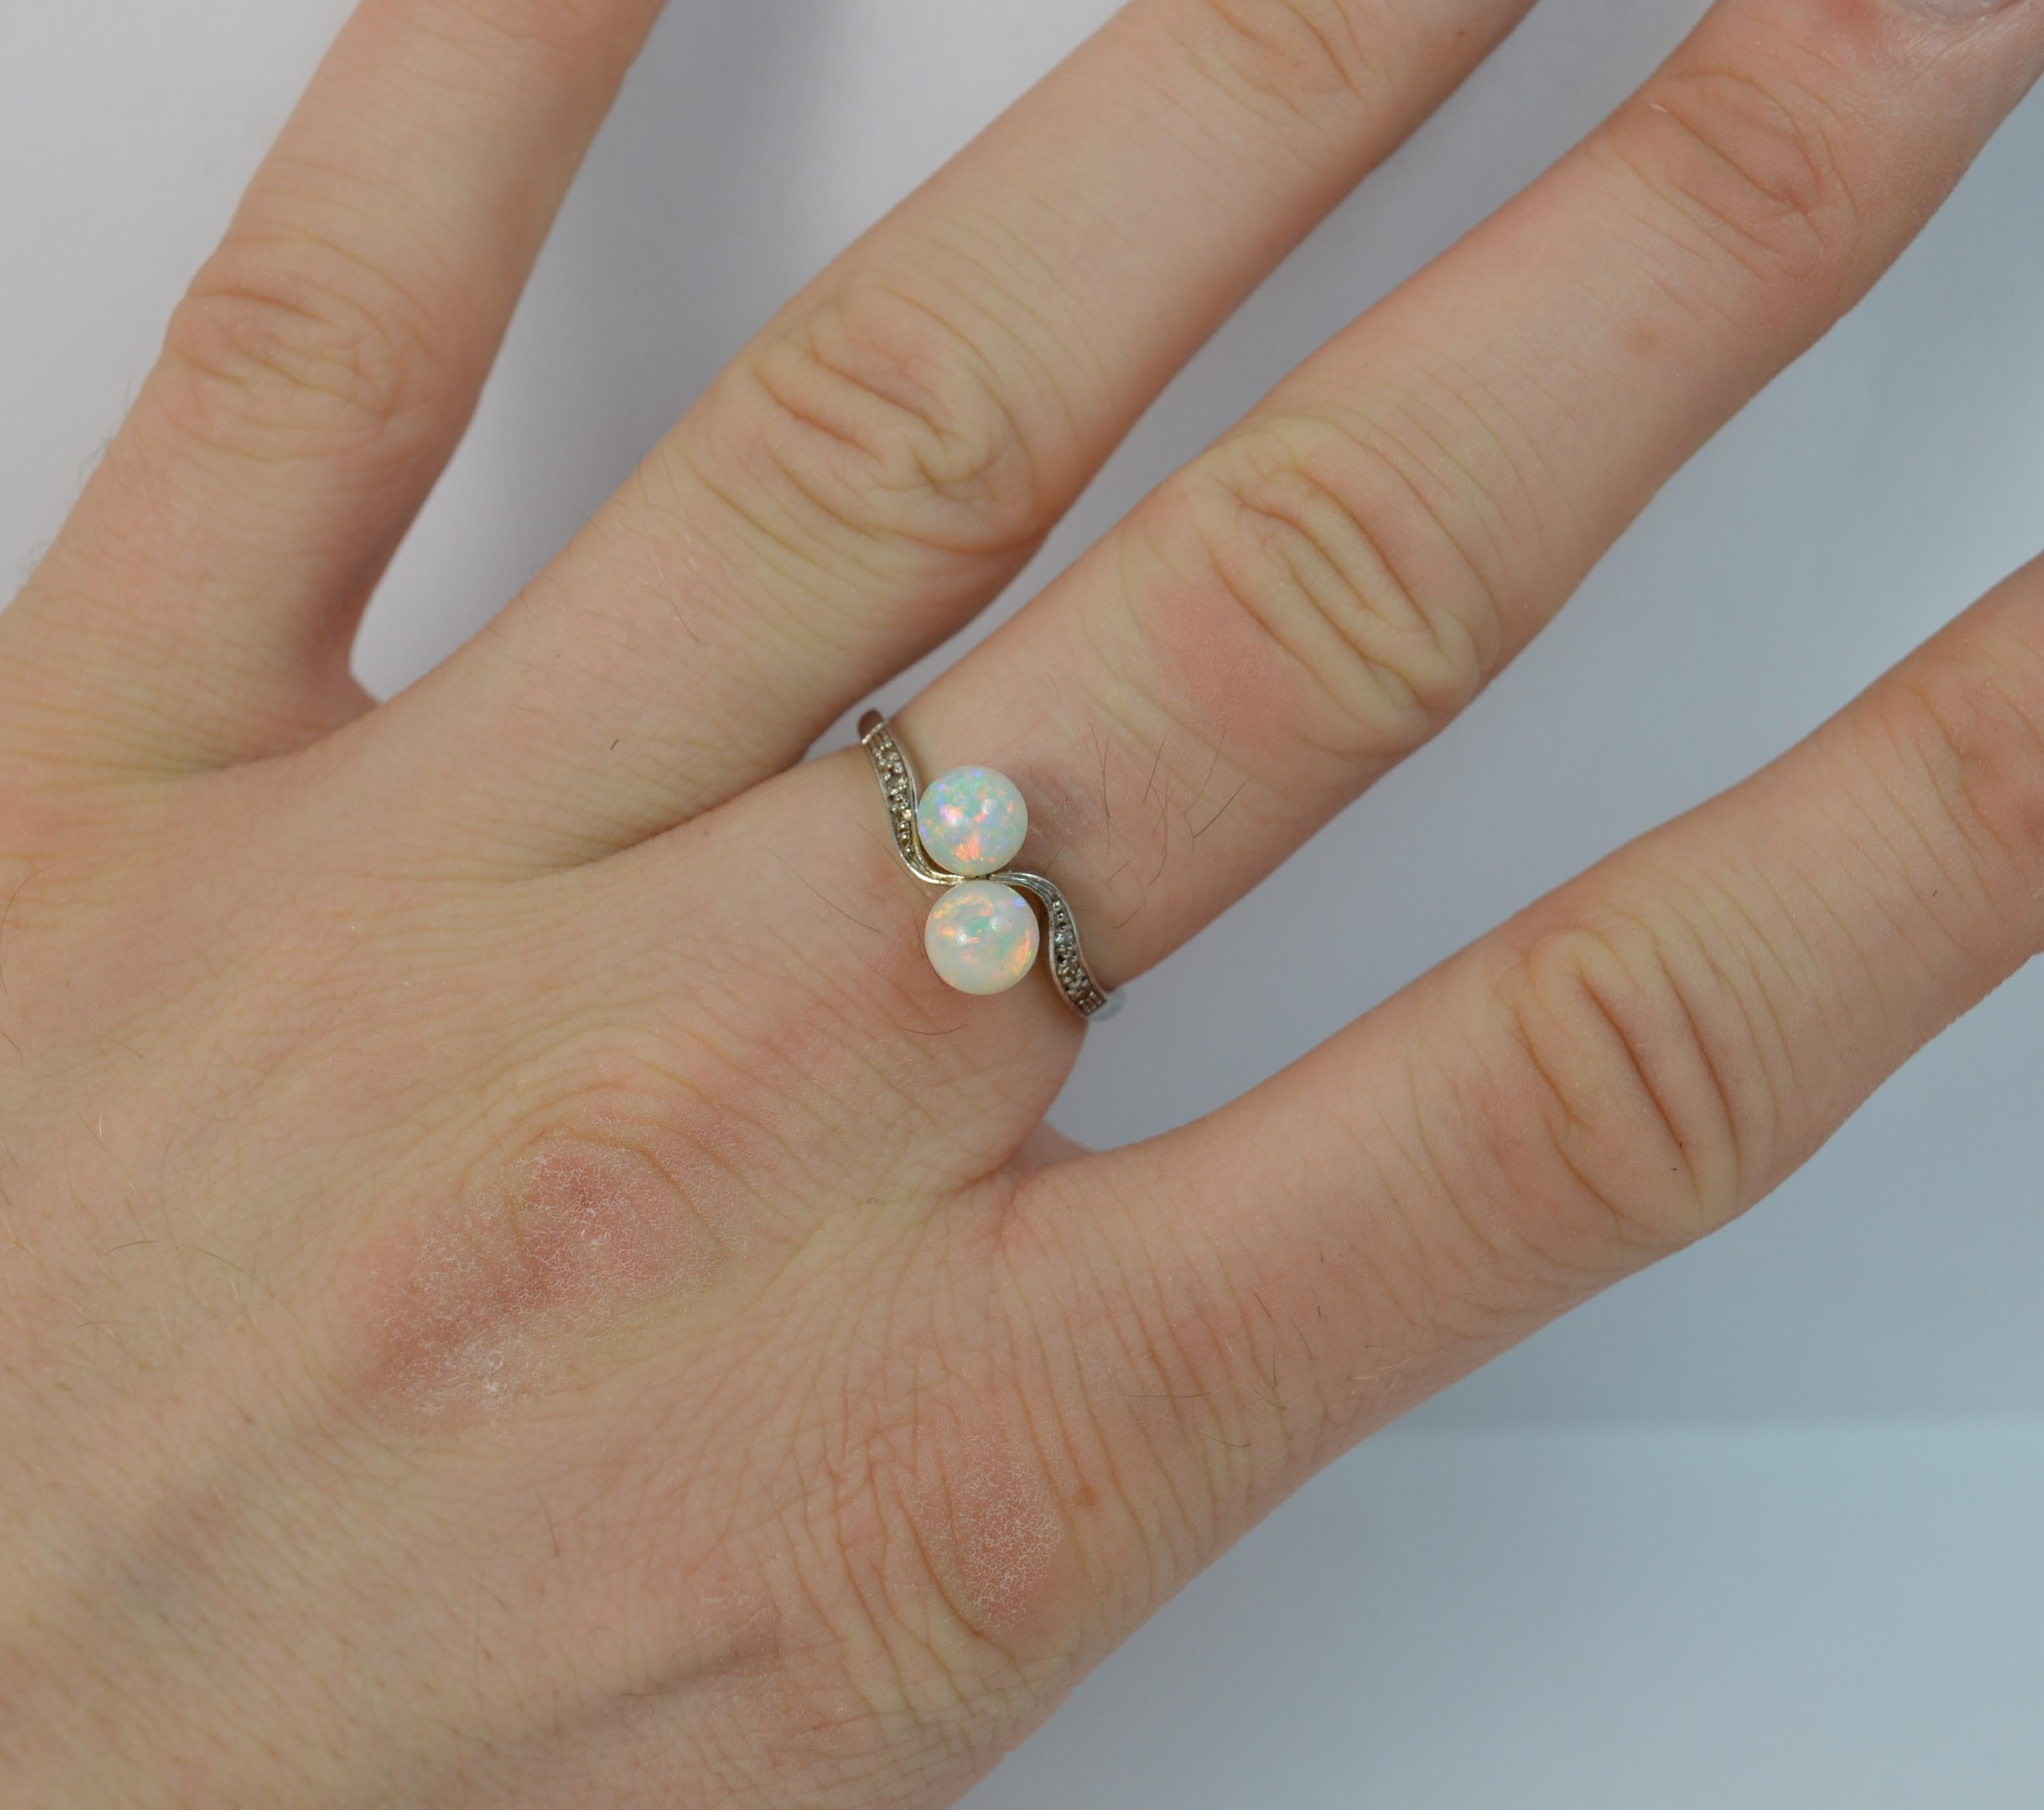 An Edwardian period toi et moi twist ring.
SIZE ; N 1/2 UK, 7 US
Solid 18 carat white gold shank with a platinum head claw setting.

Designed with two opal balls on a twist with three diamonds into the band to each side.

Each opal approx 5.2mm in